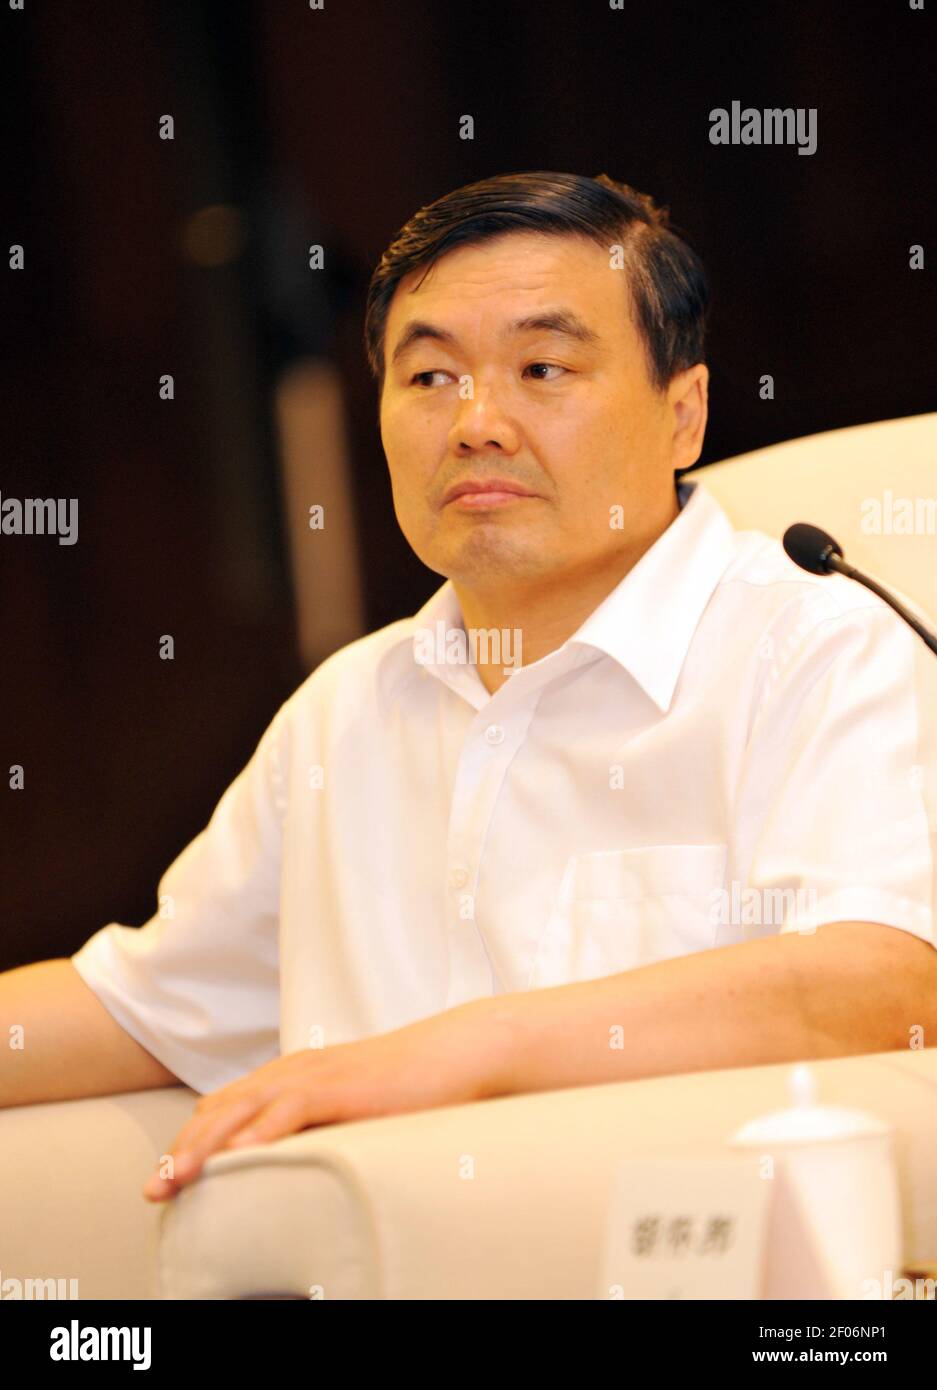 Hu Huaibang, the former chairman of Bank of Communications, shows up in Xiamen city, southeast China's Fujian province, 10 June 2011. Hu Huaibang, the former chairman of policy lender China Development Bank (CDB) linked to a secretive business tycoon, is now under investigation, in the latest case of China¡¯s years-long campaign against corruption in the financial sector. (Photo by Xiang Yang - Imaginechina/Sipa USA) Stock Photo